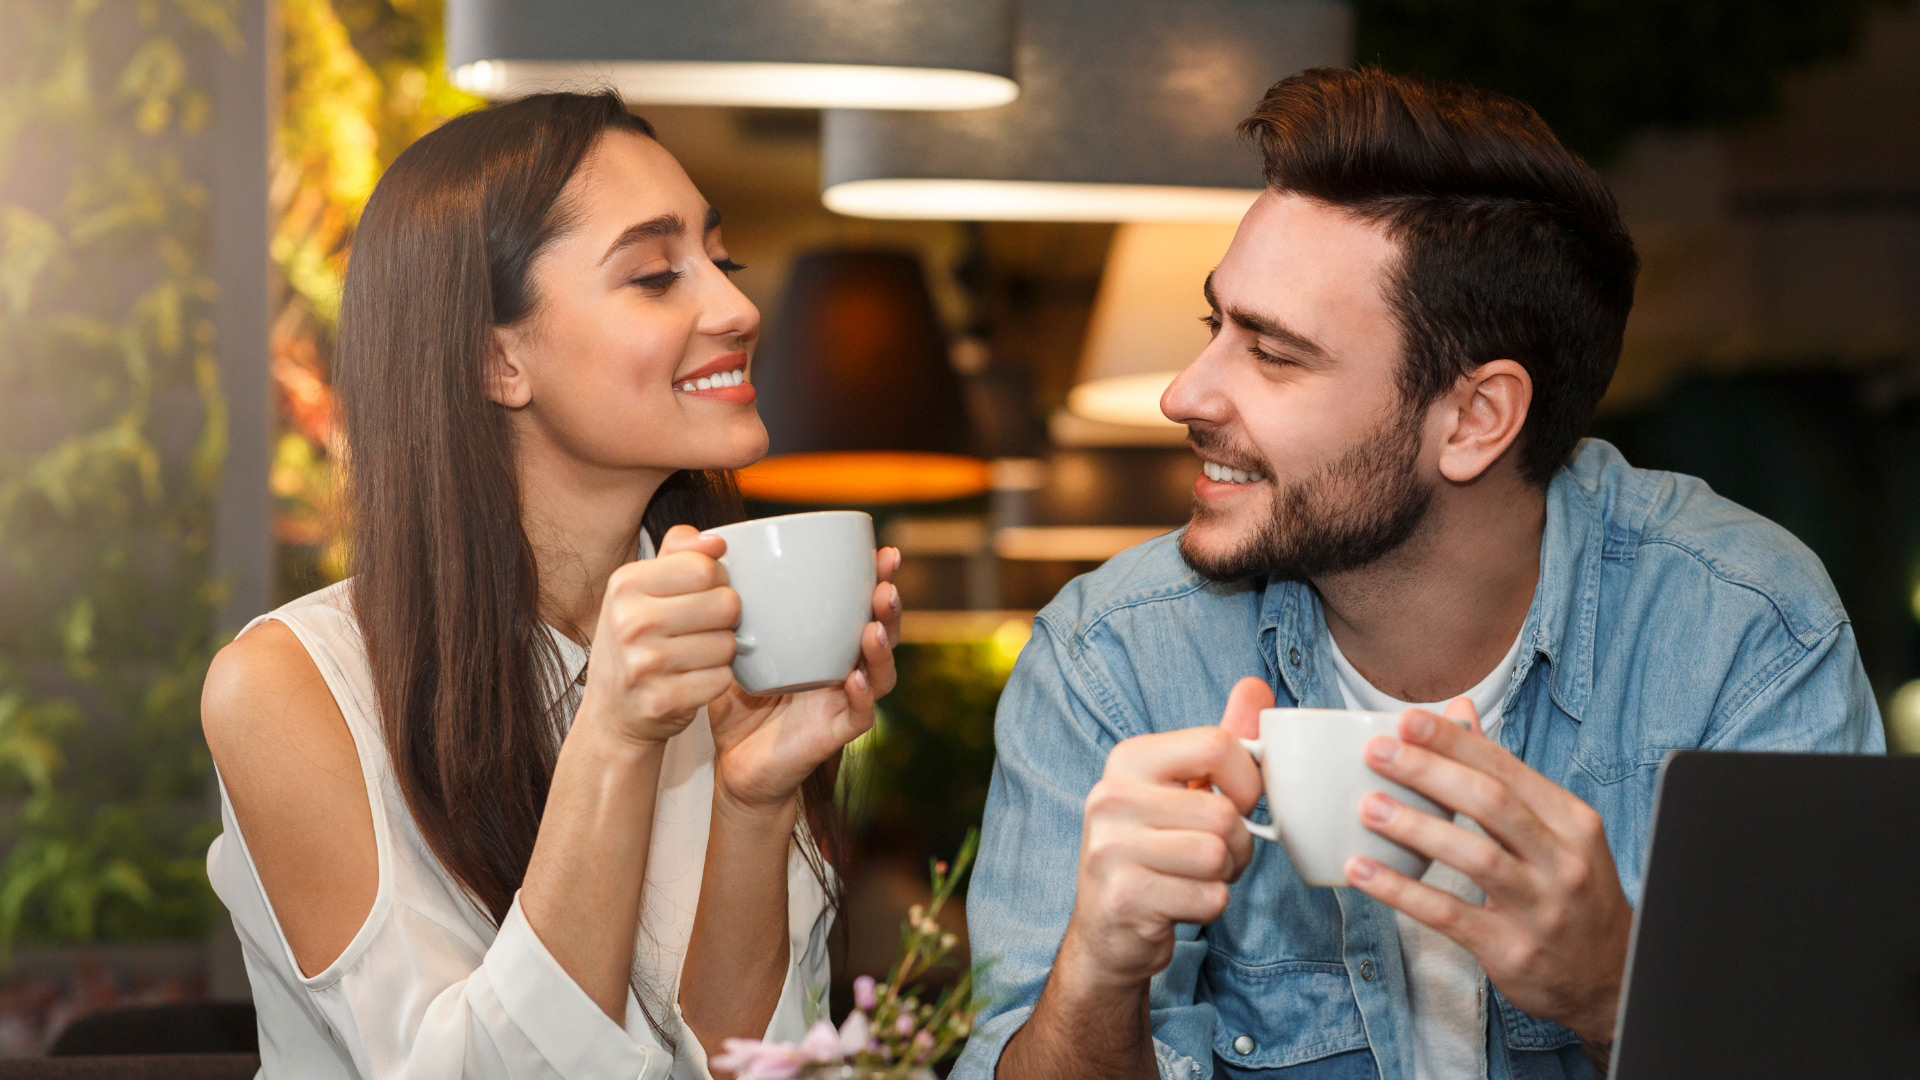 Brunette man and brunette woman sitting together having a coffee, and smiling at one another